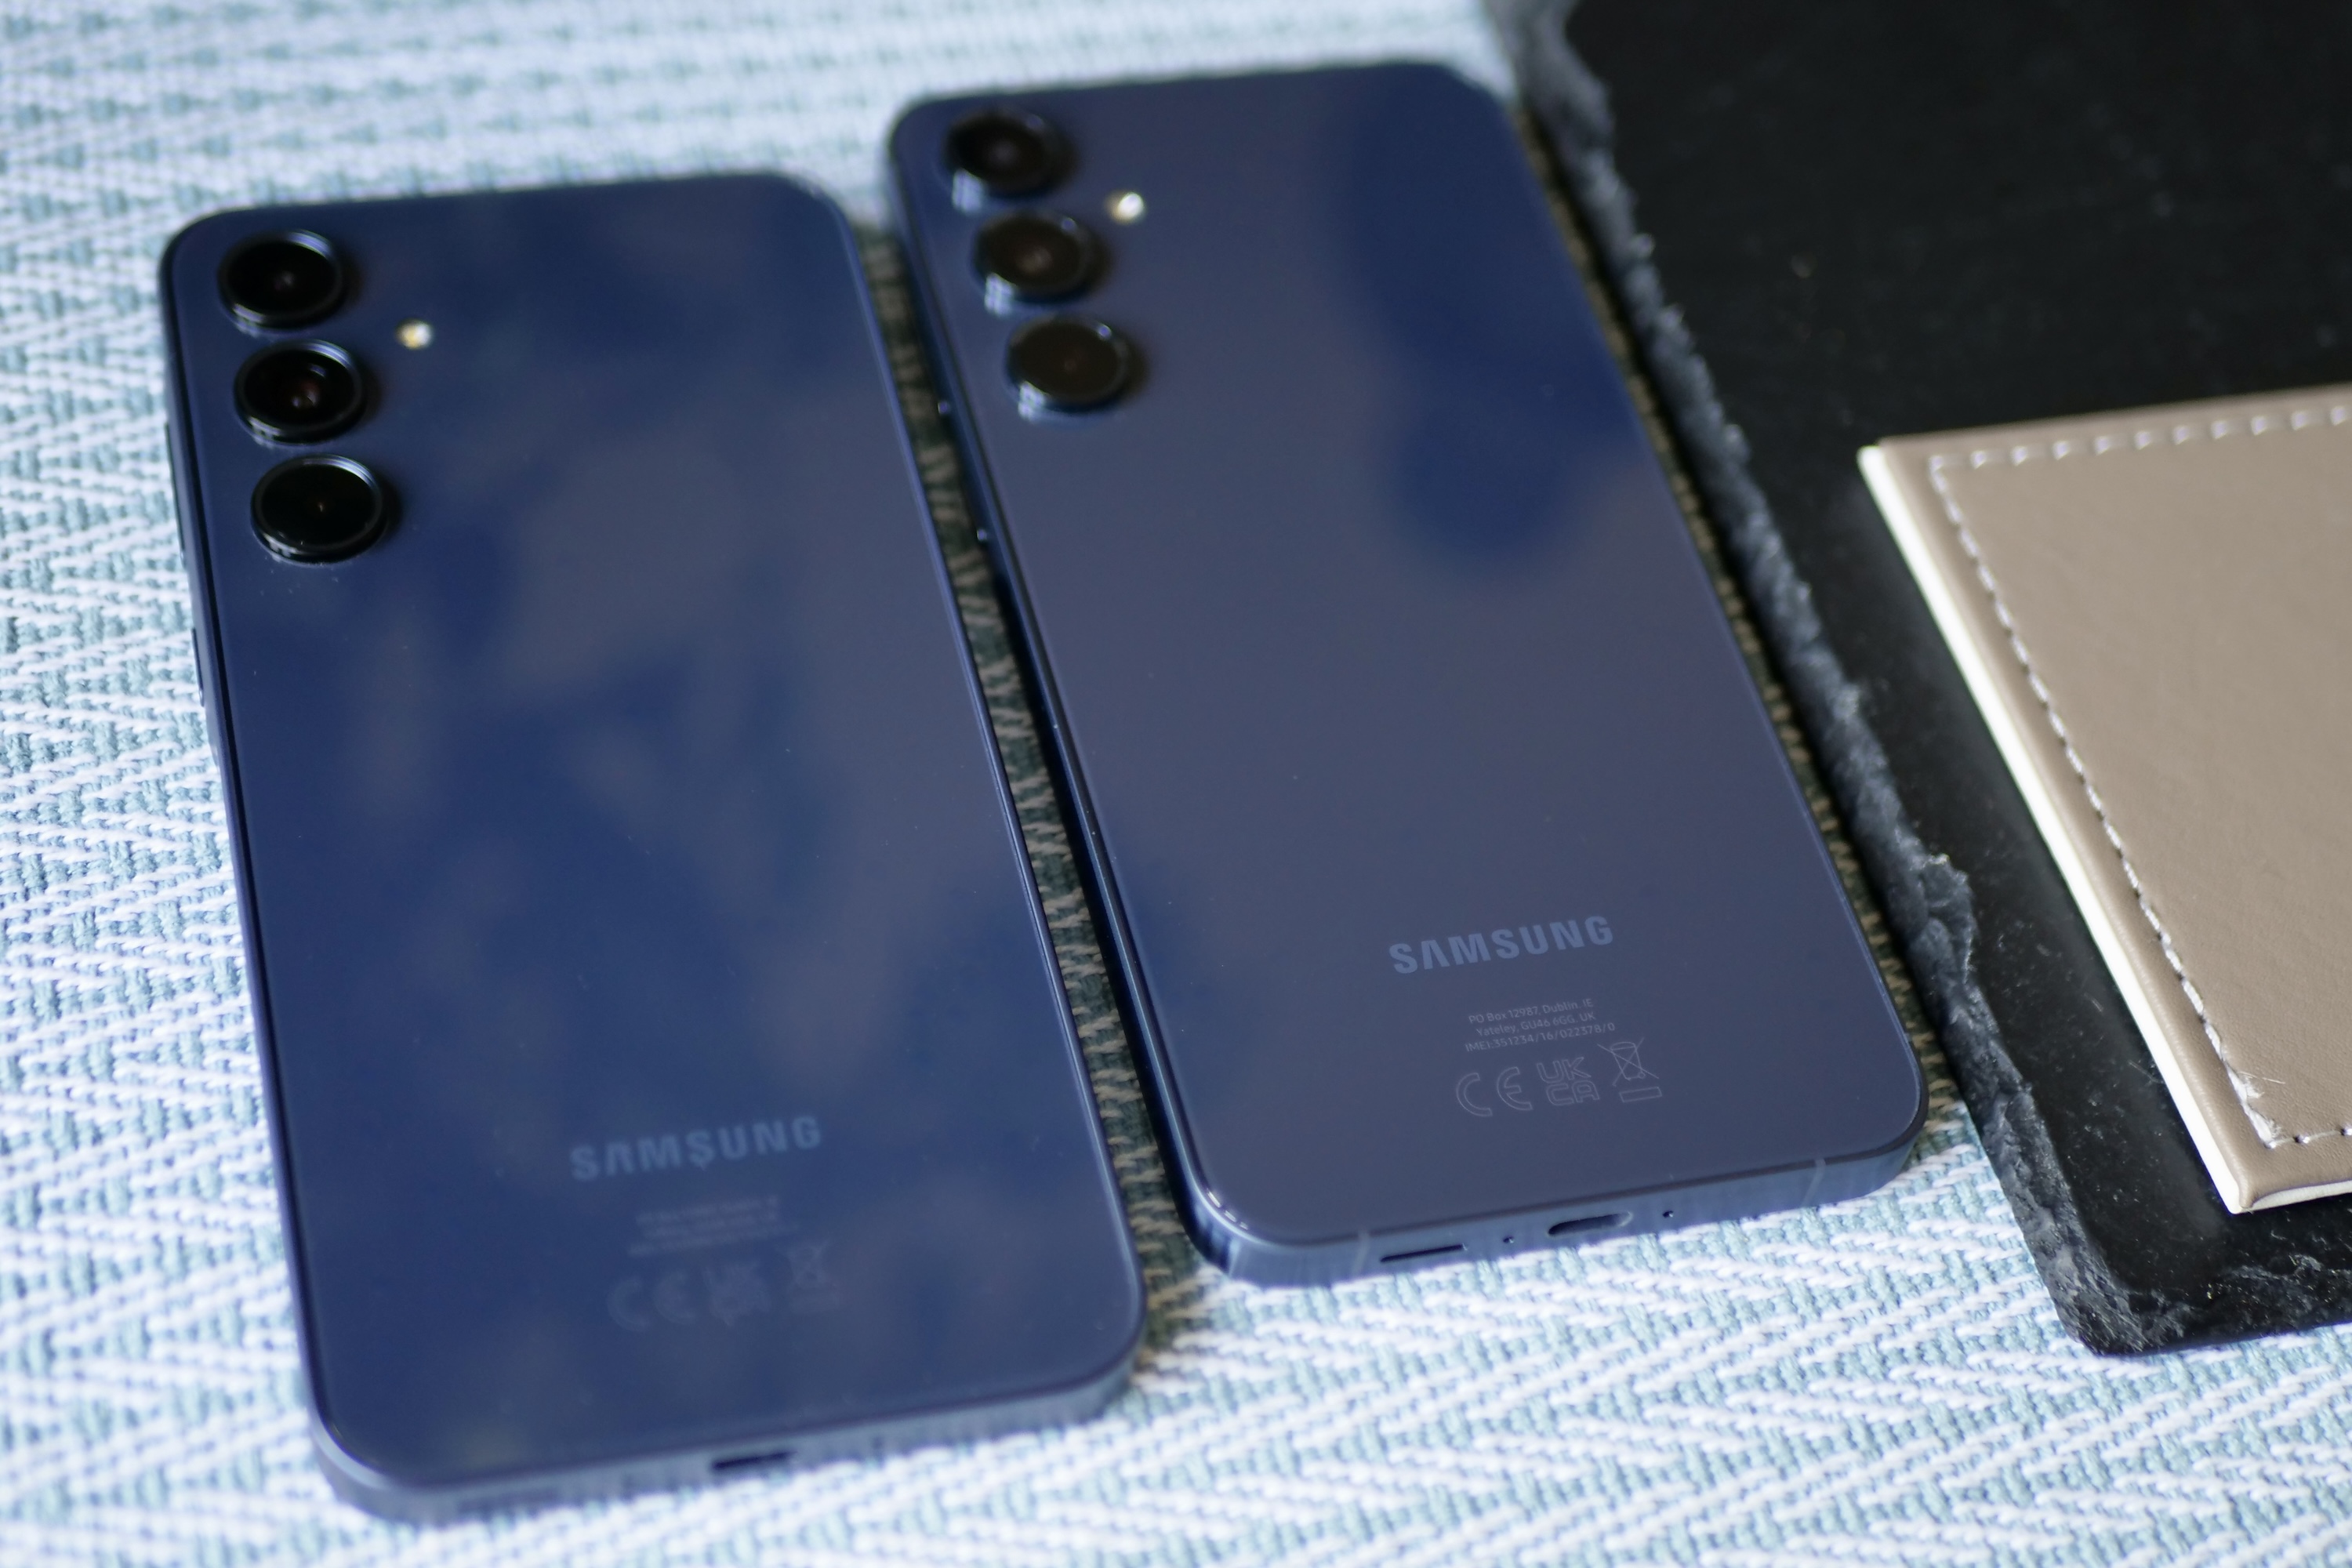 The Samsung Galaxy A35 and Galaxy A55's rear panels.